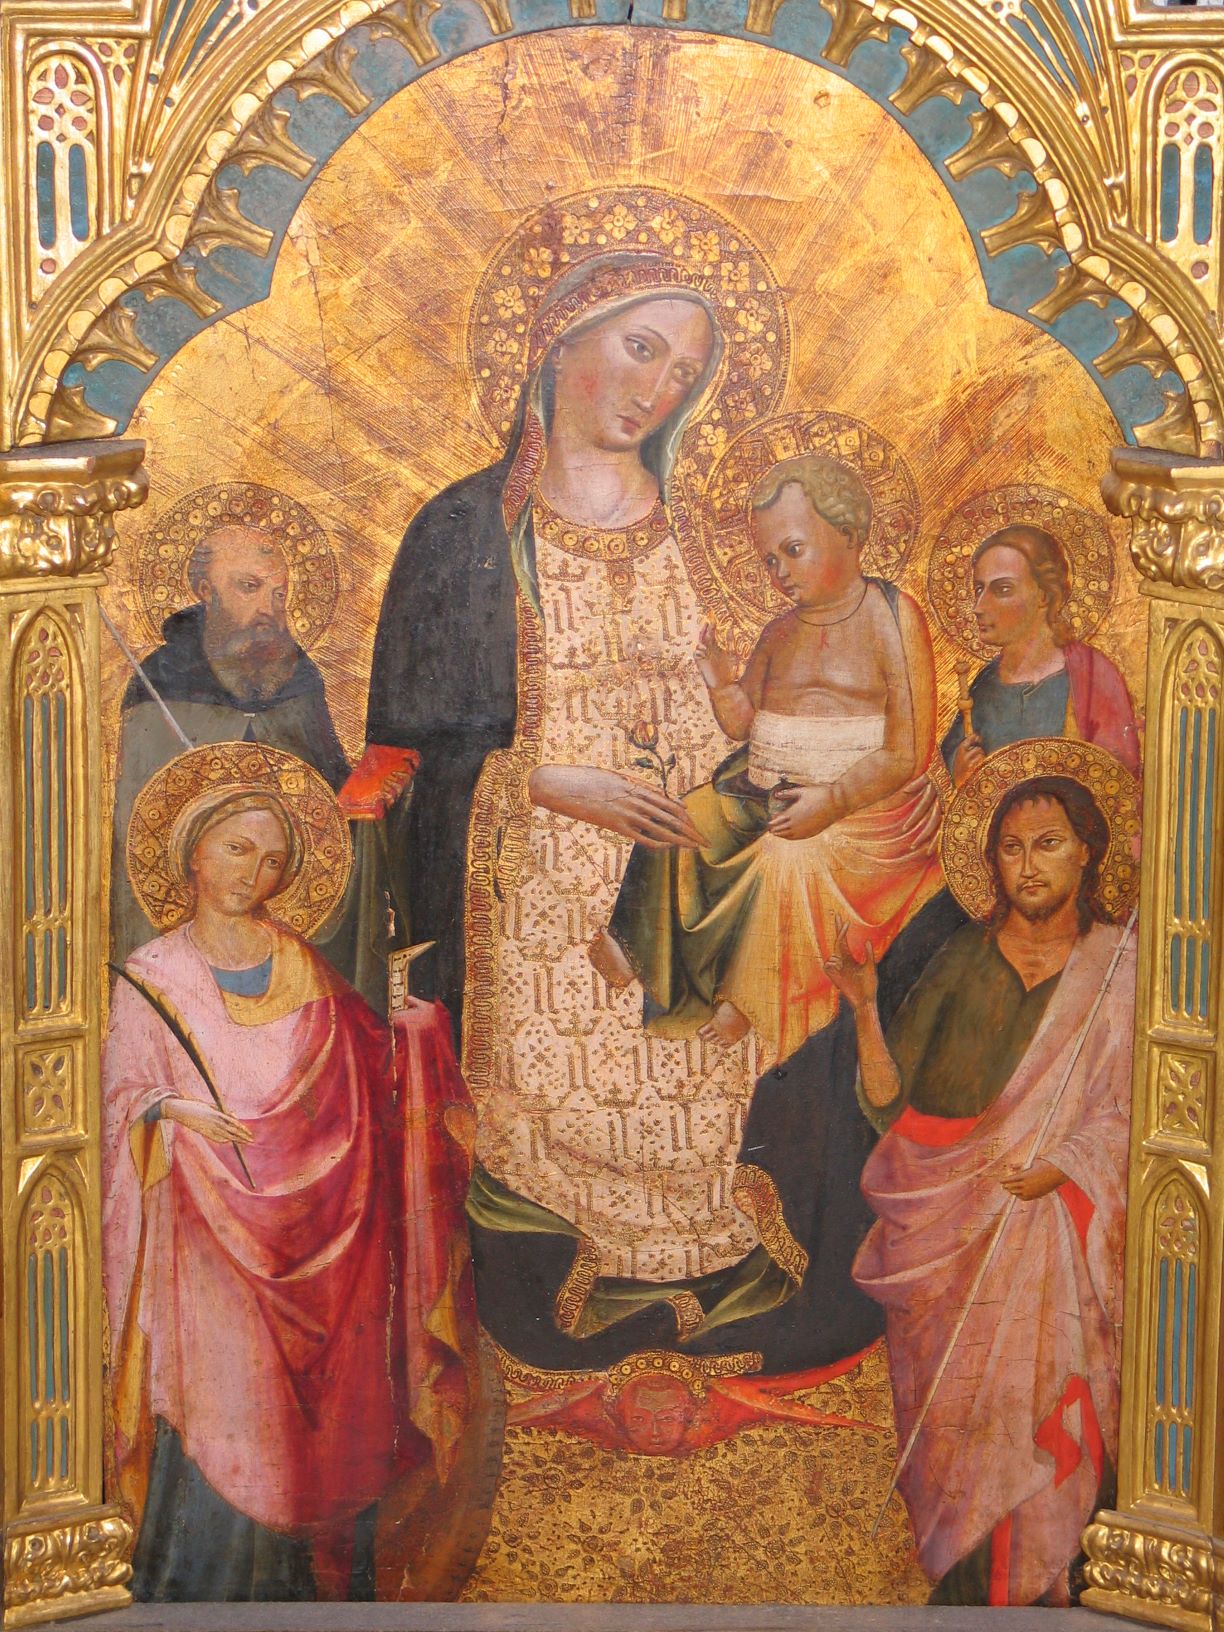 Detail of work of art depicting Virgin Mary holding infant Jesus, surrounded by saints on gold background.